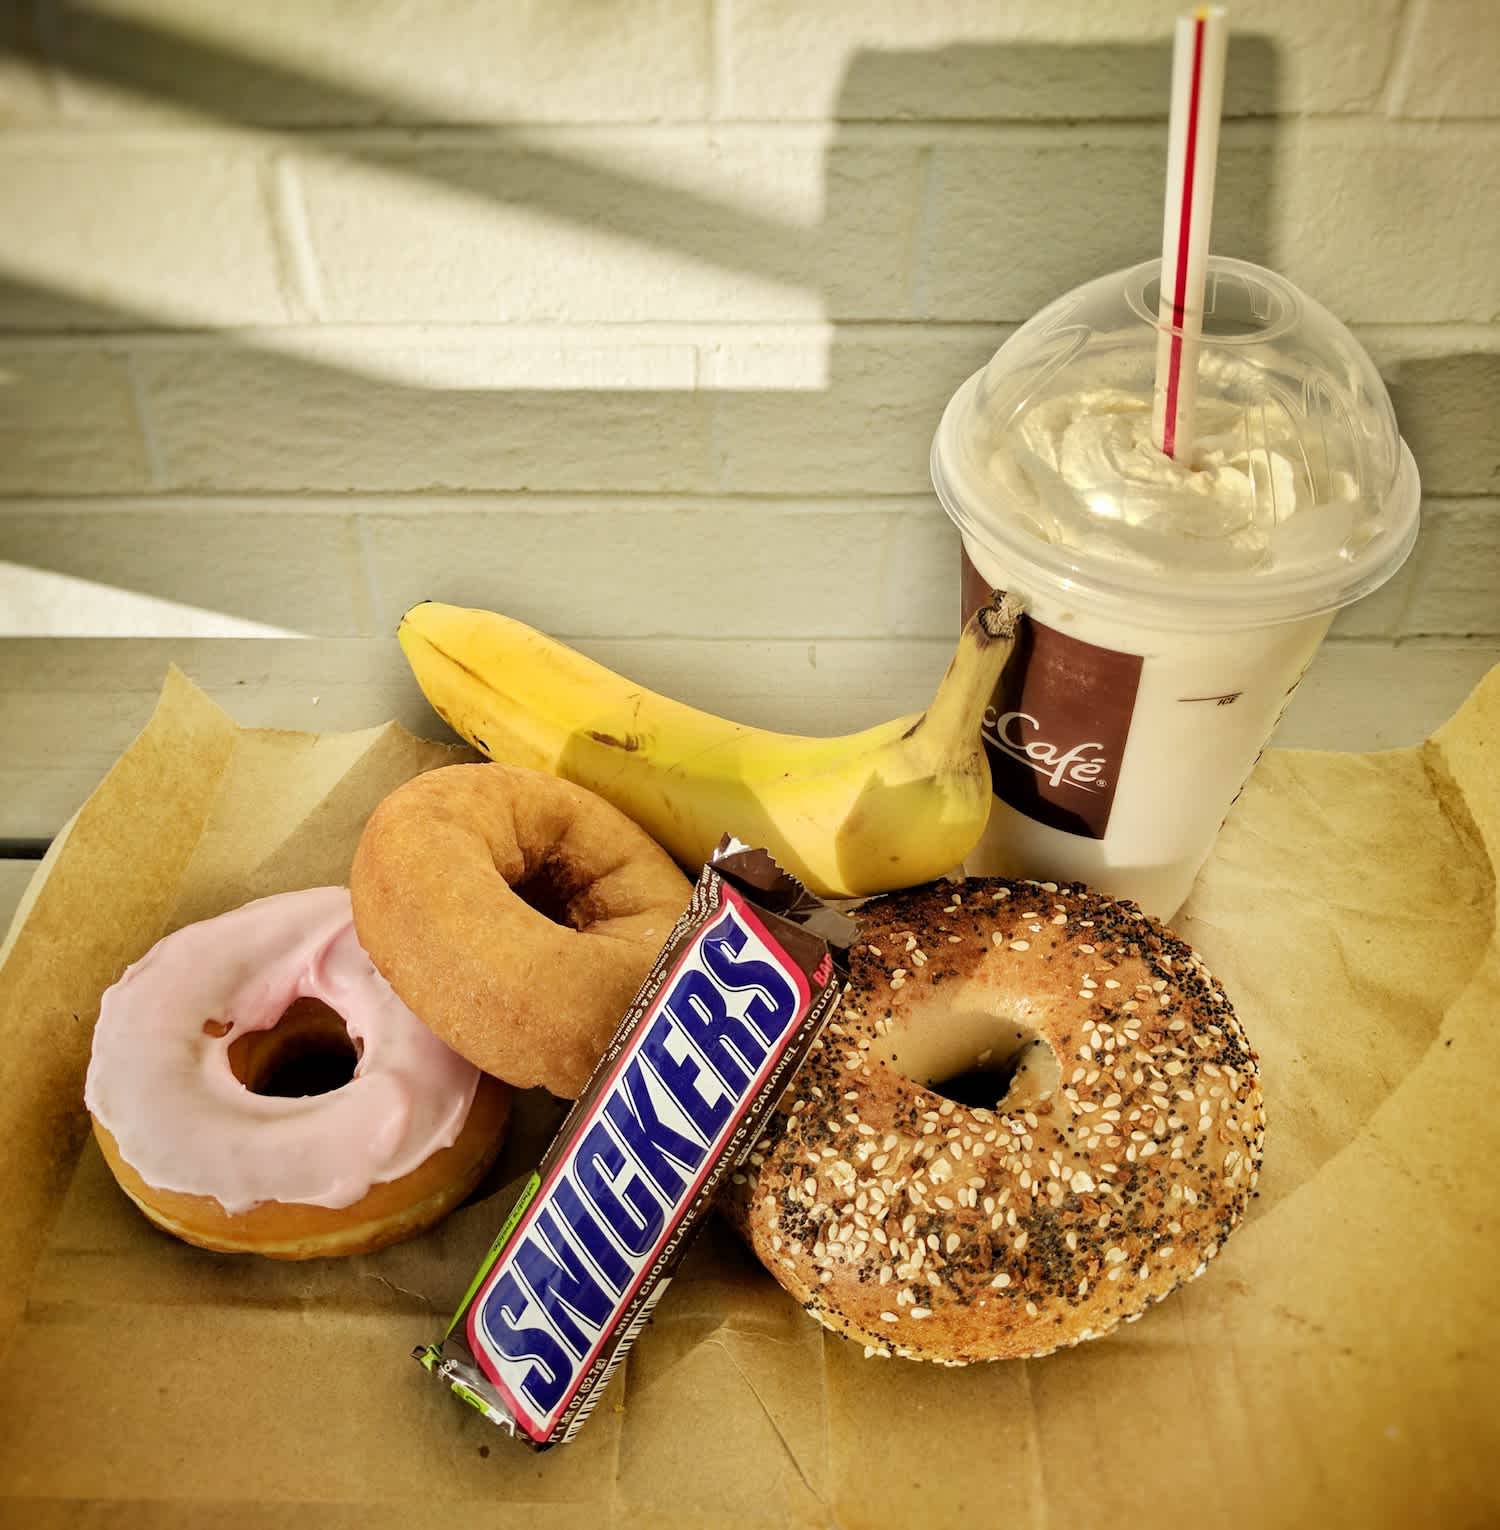 Fun facts about the above foods: (1) The banana has the “lowest calories,” but the Snickers bar is in 2nd place; the medium milkshake is the most calorically dense, tied with the donuts (2) The back of the Snickers bar boldy says, “SATISFIES” — now, why would they say that?